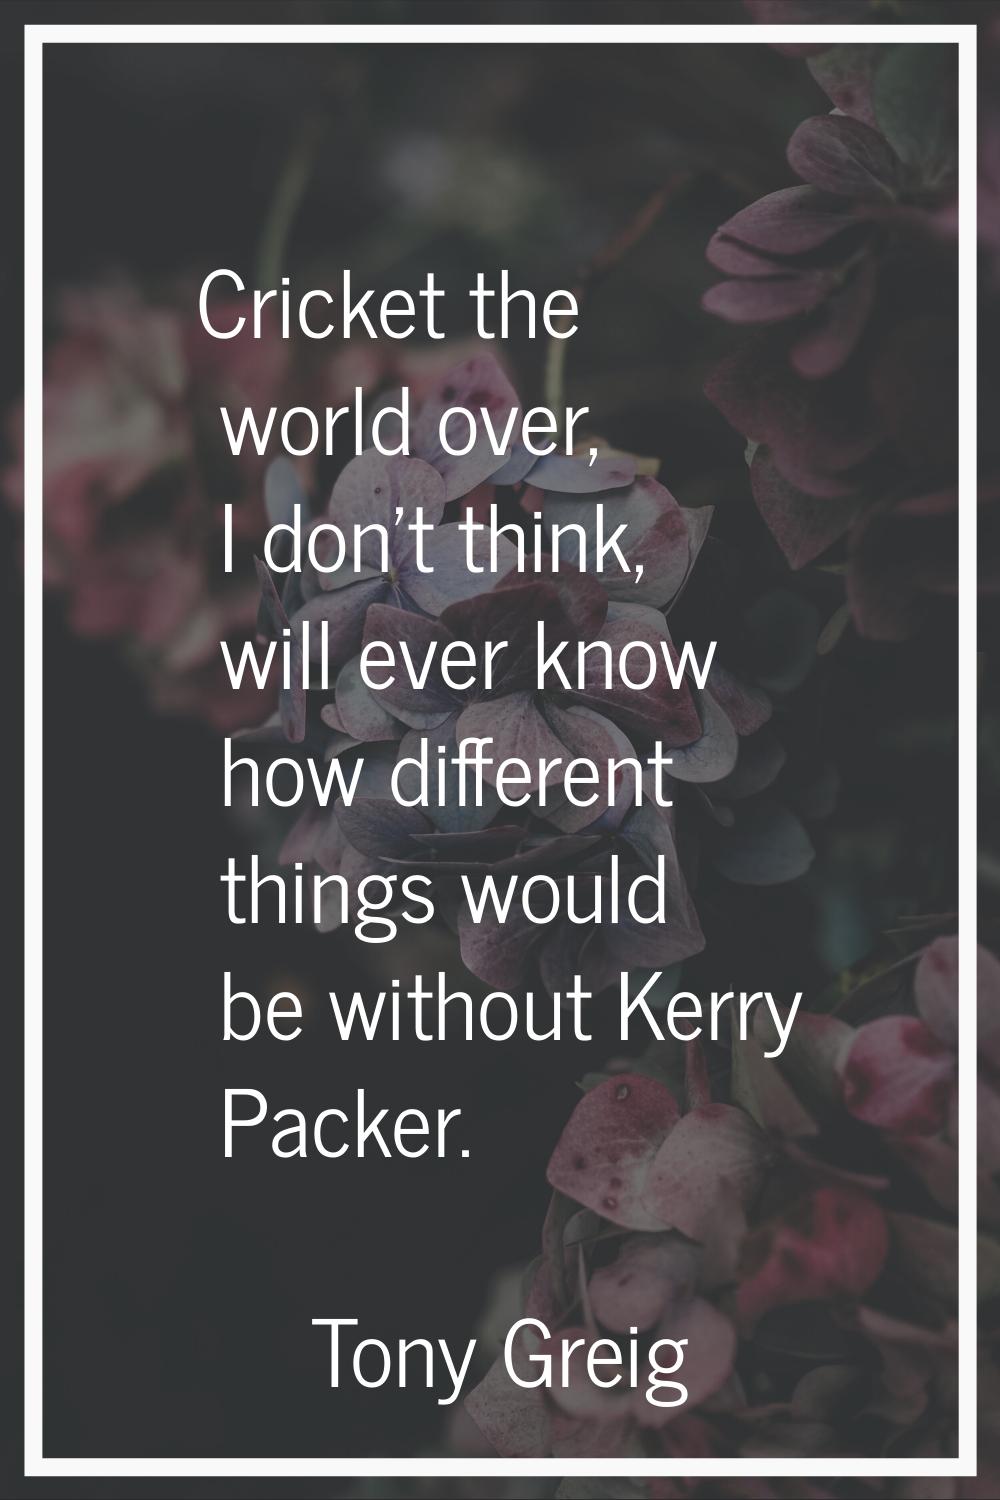 Cricket the world over, I don't think, will ever know how different things would be without Kerry P